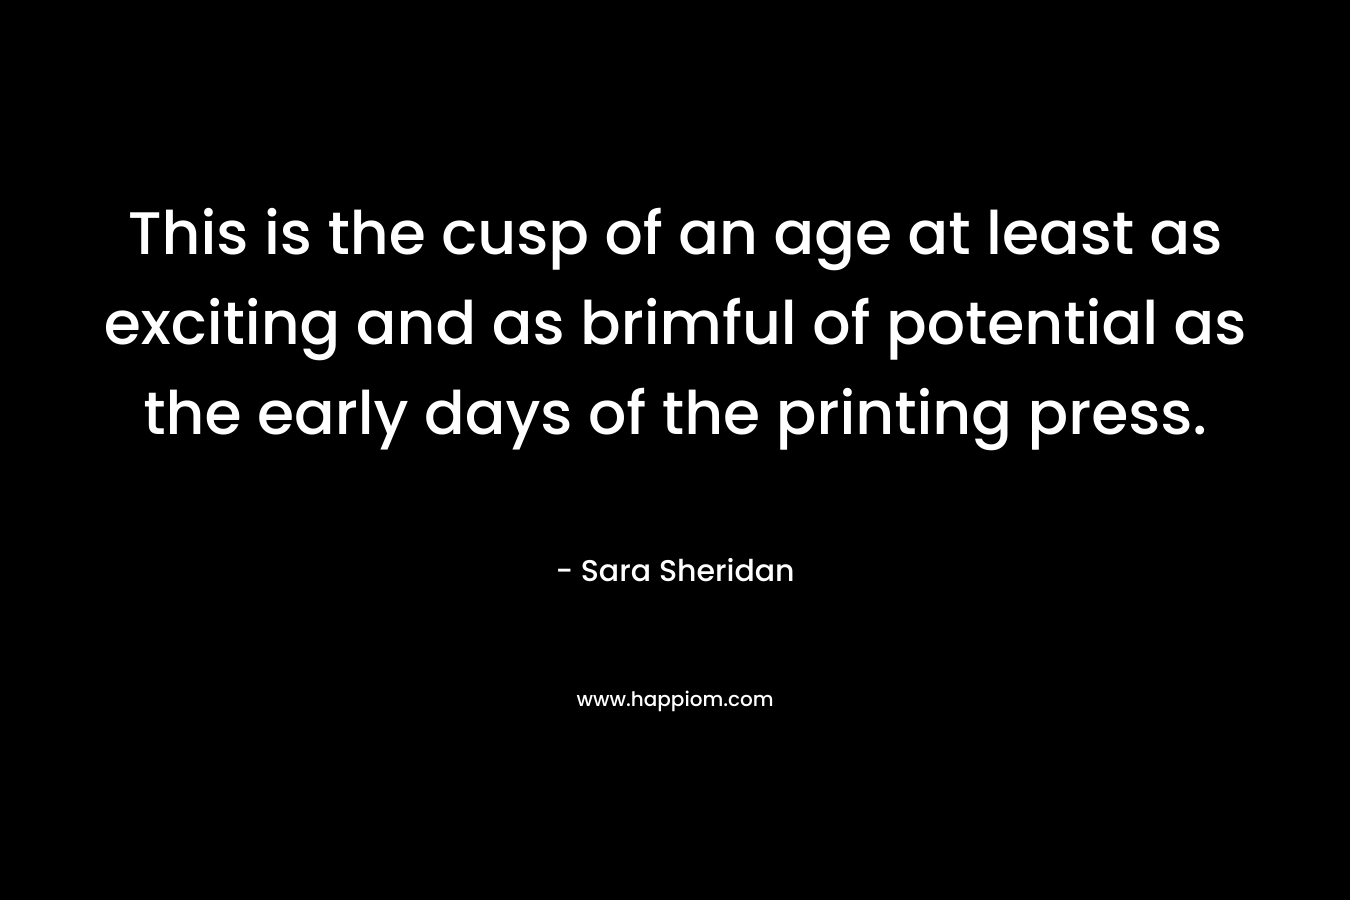 This is the cusp of an age at least as exciting and as brimful of potential as the early days of the printing press. – Sara Sheridan